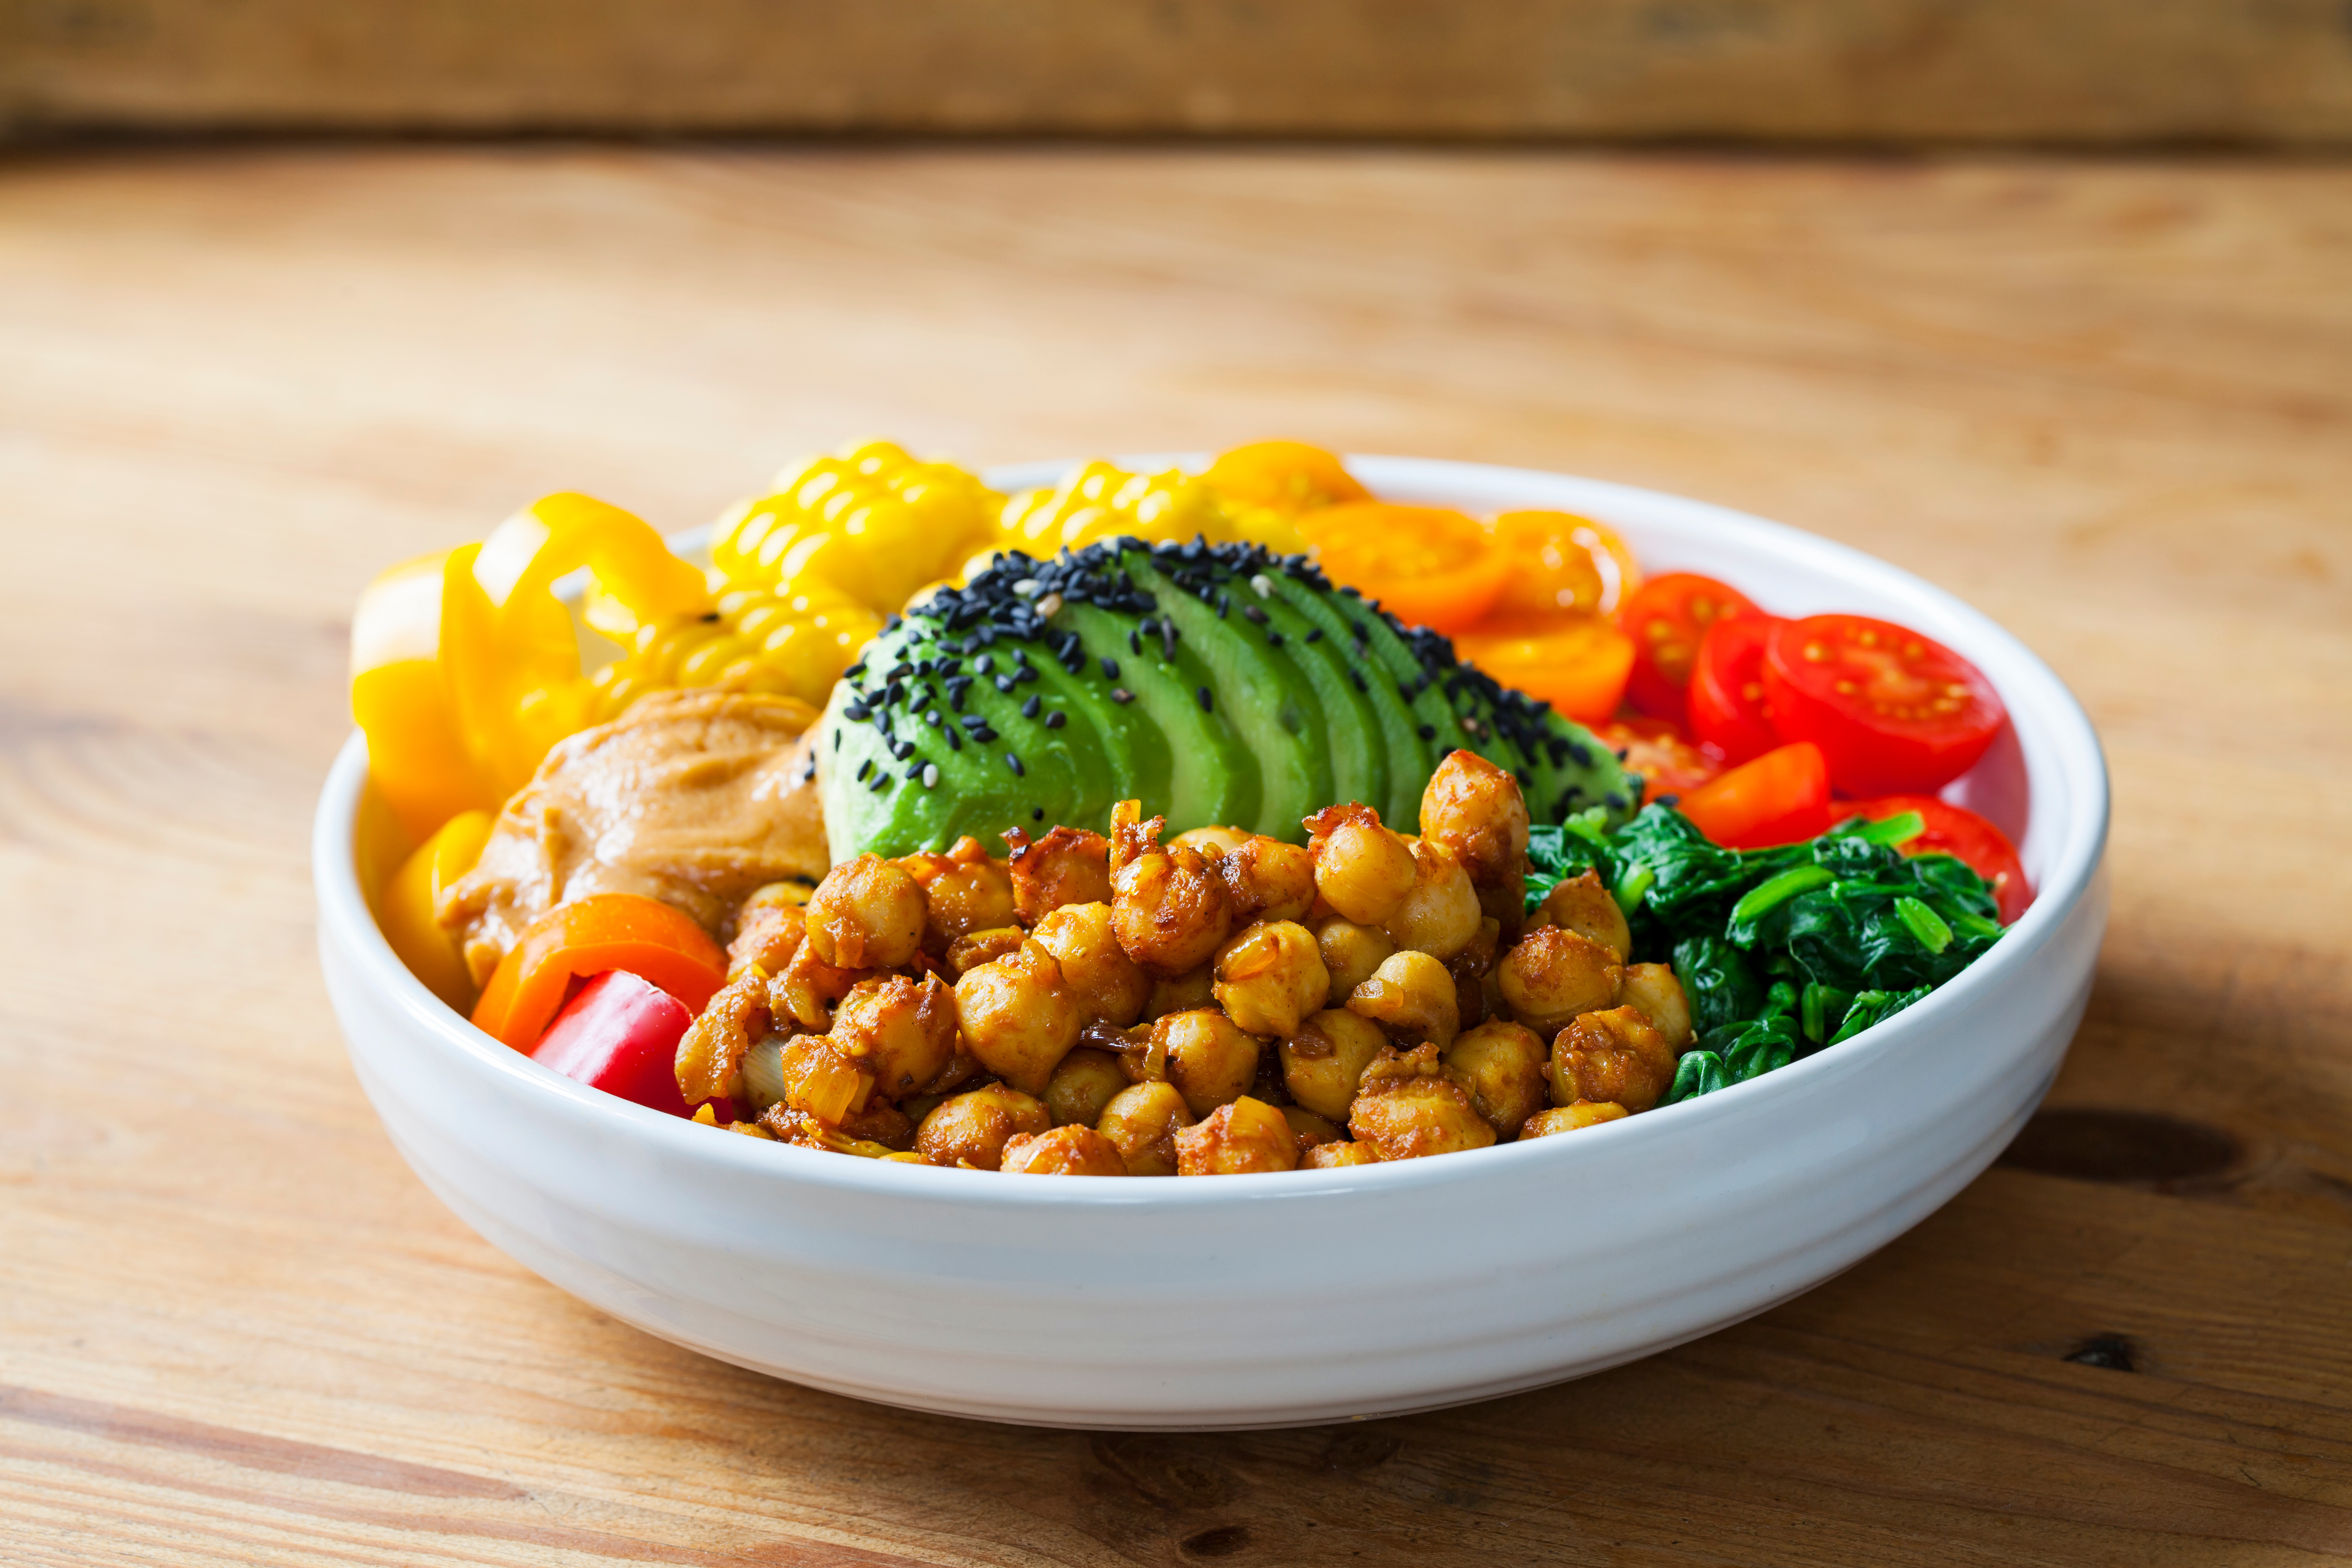 How to thrive on a plant-based diet